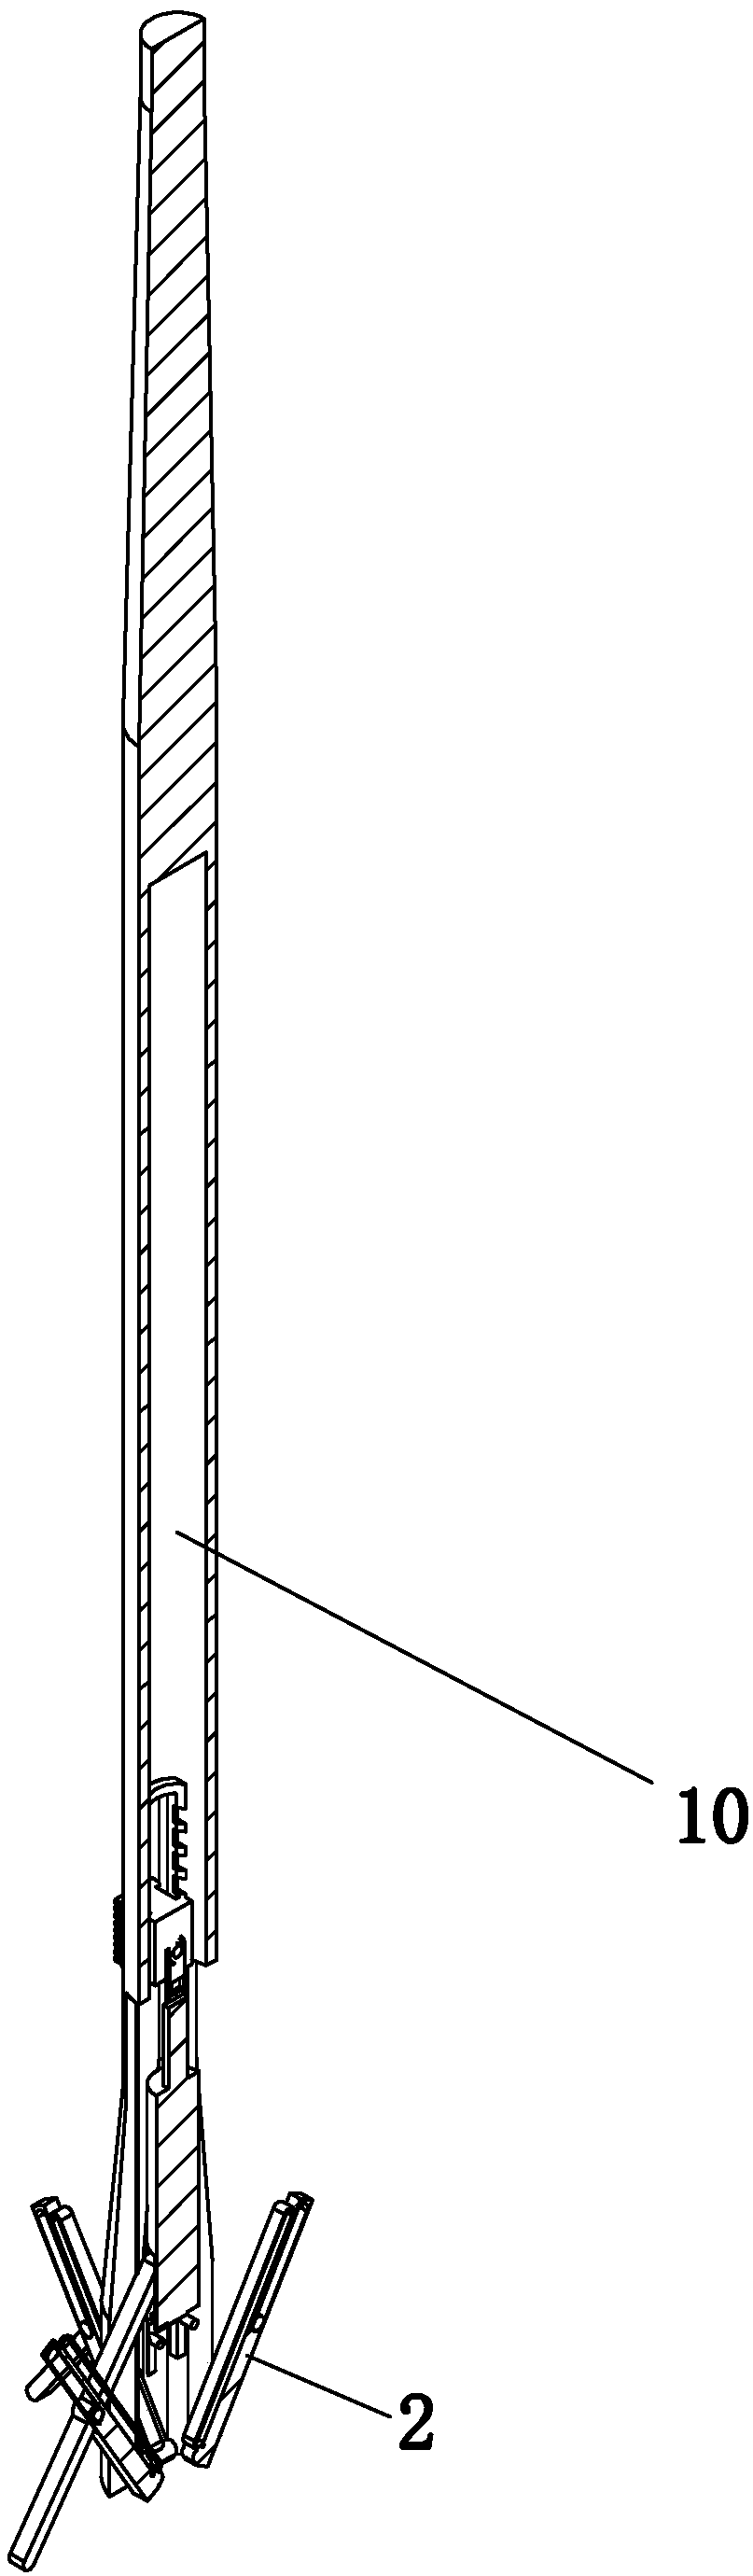 Billiard cue capable of being automatically unfolded and supported